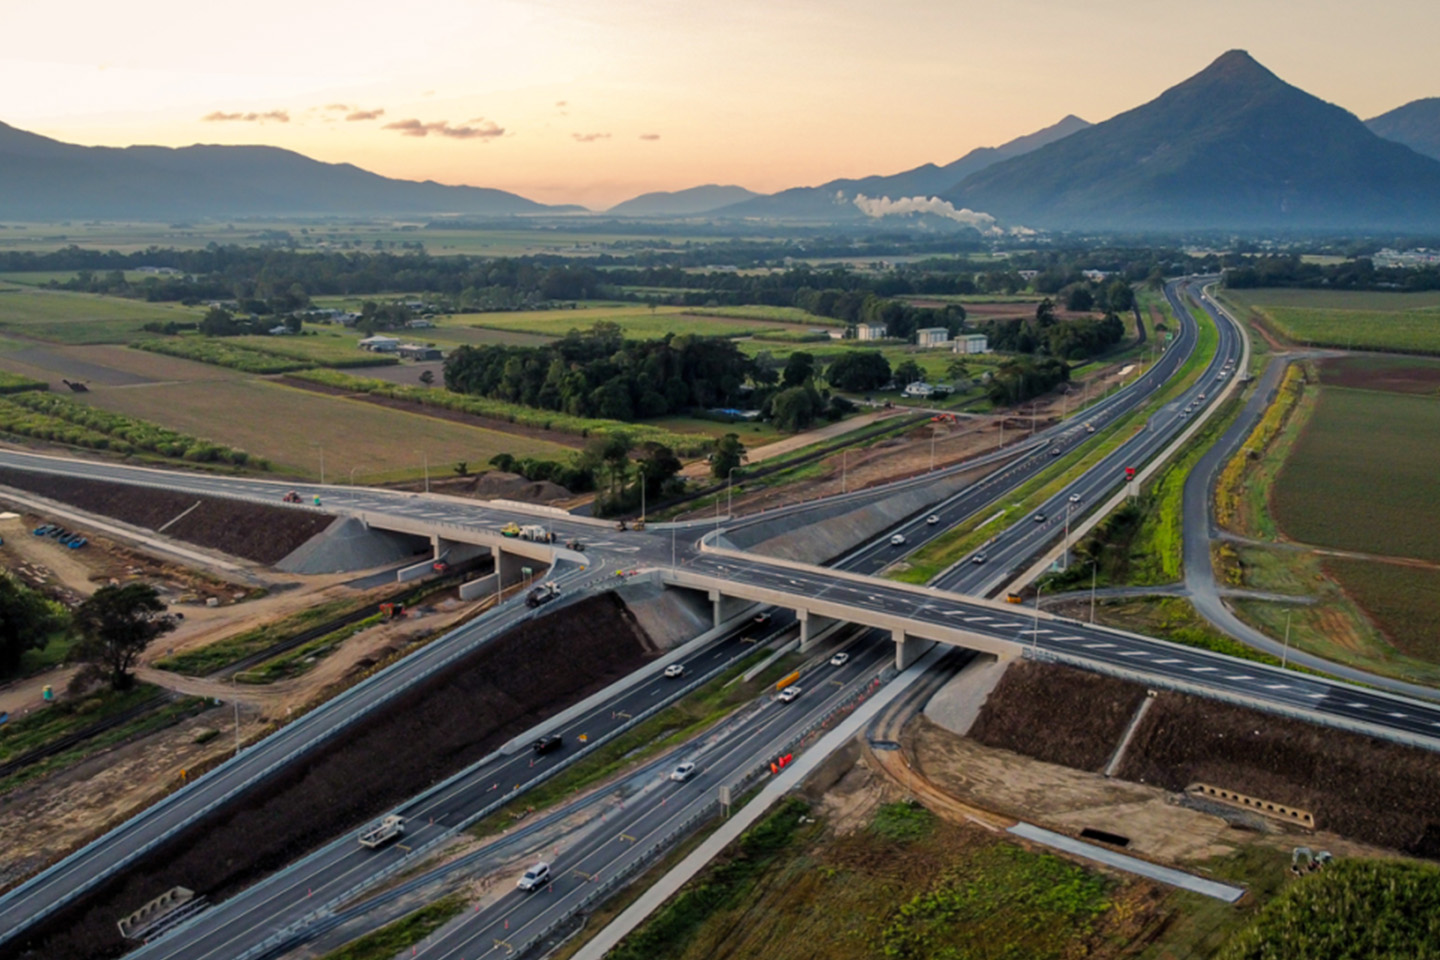 Aerial shot of a road construction site with mountains in the background as the sun sets